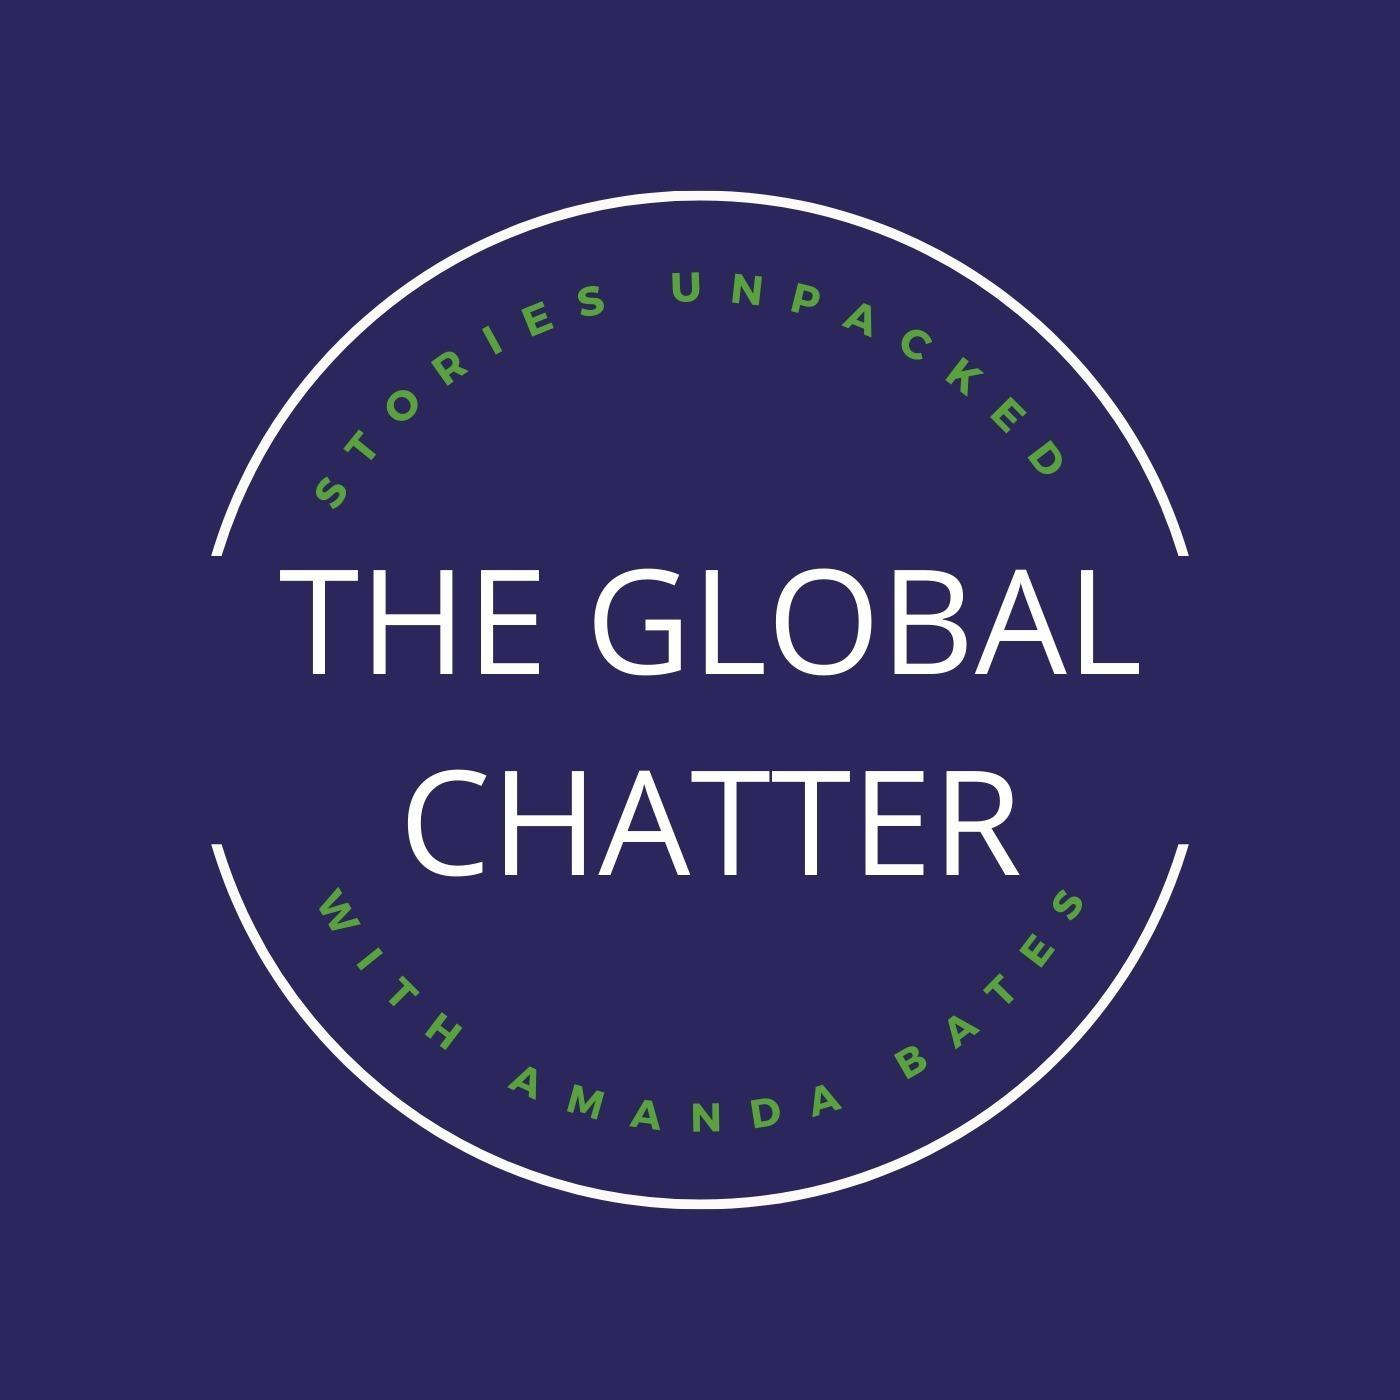 The Global Chatter with Amanda Bates